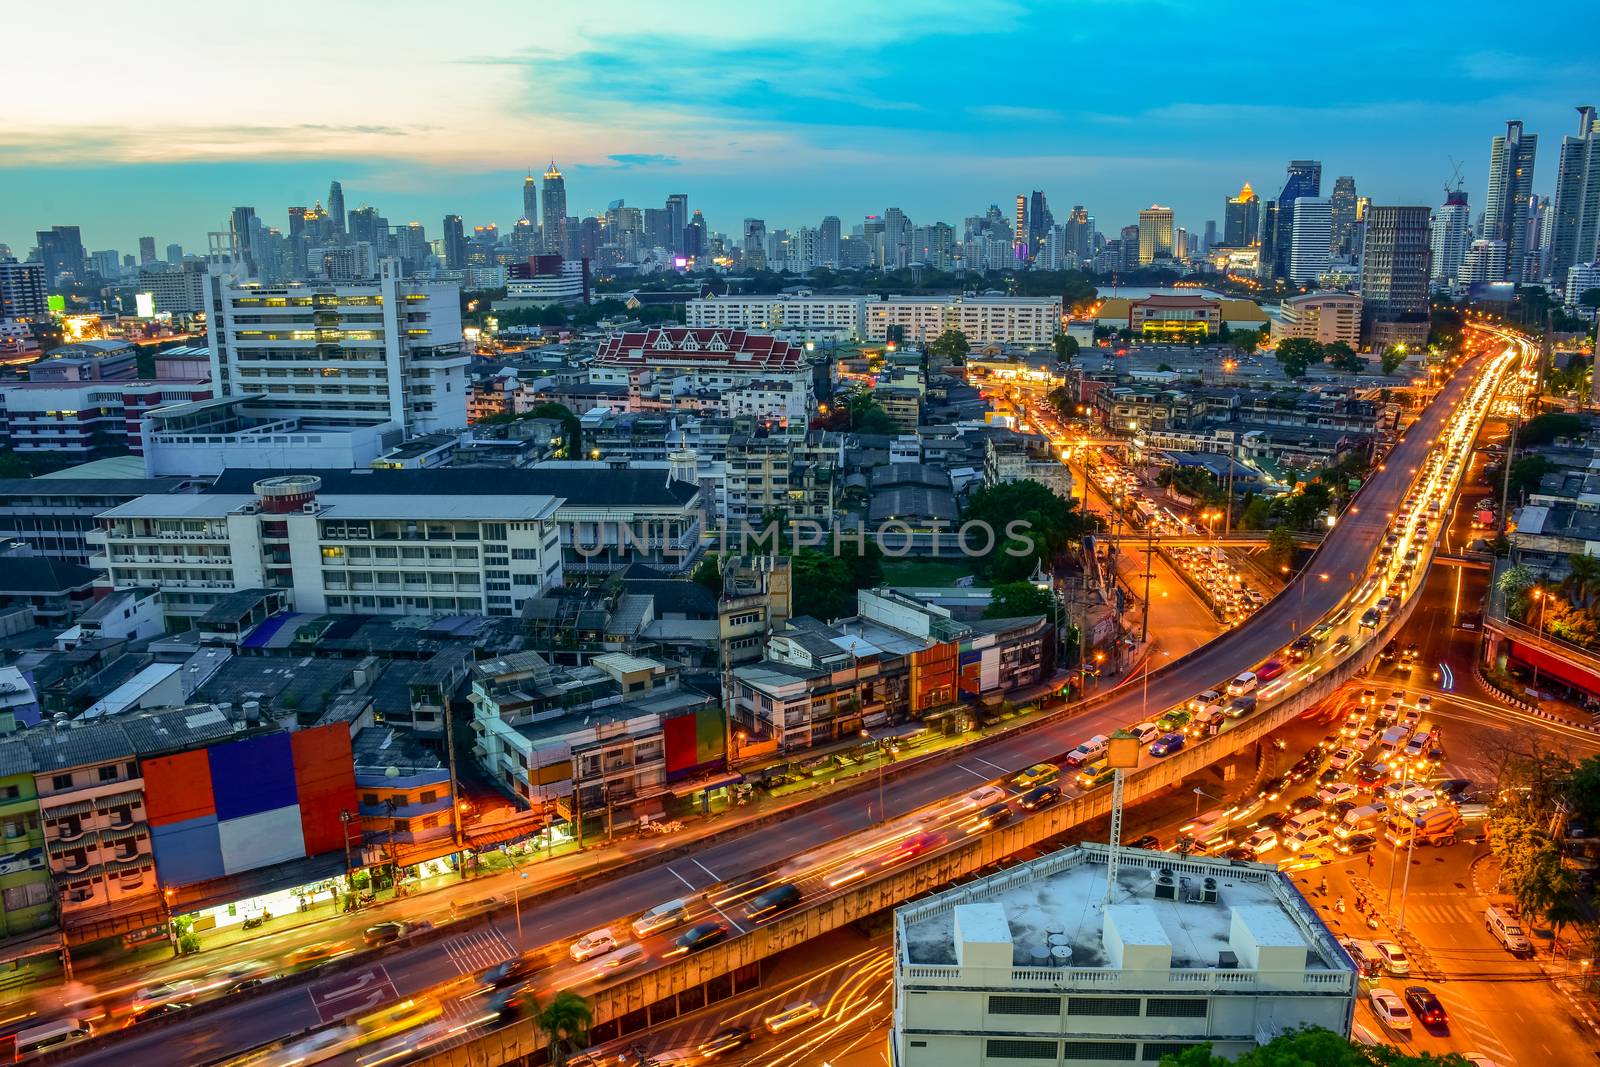 Nighttime of Bangkok city. Bangkok is the capital and the most populous city of Thailand.